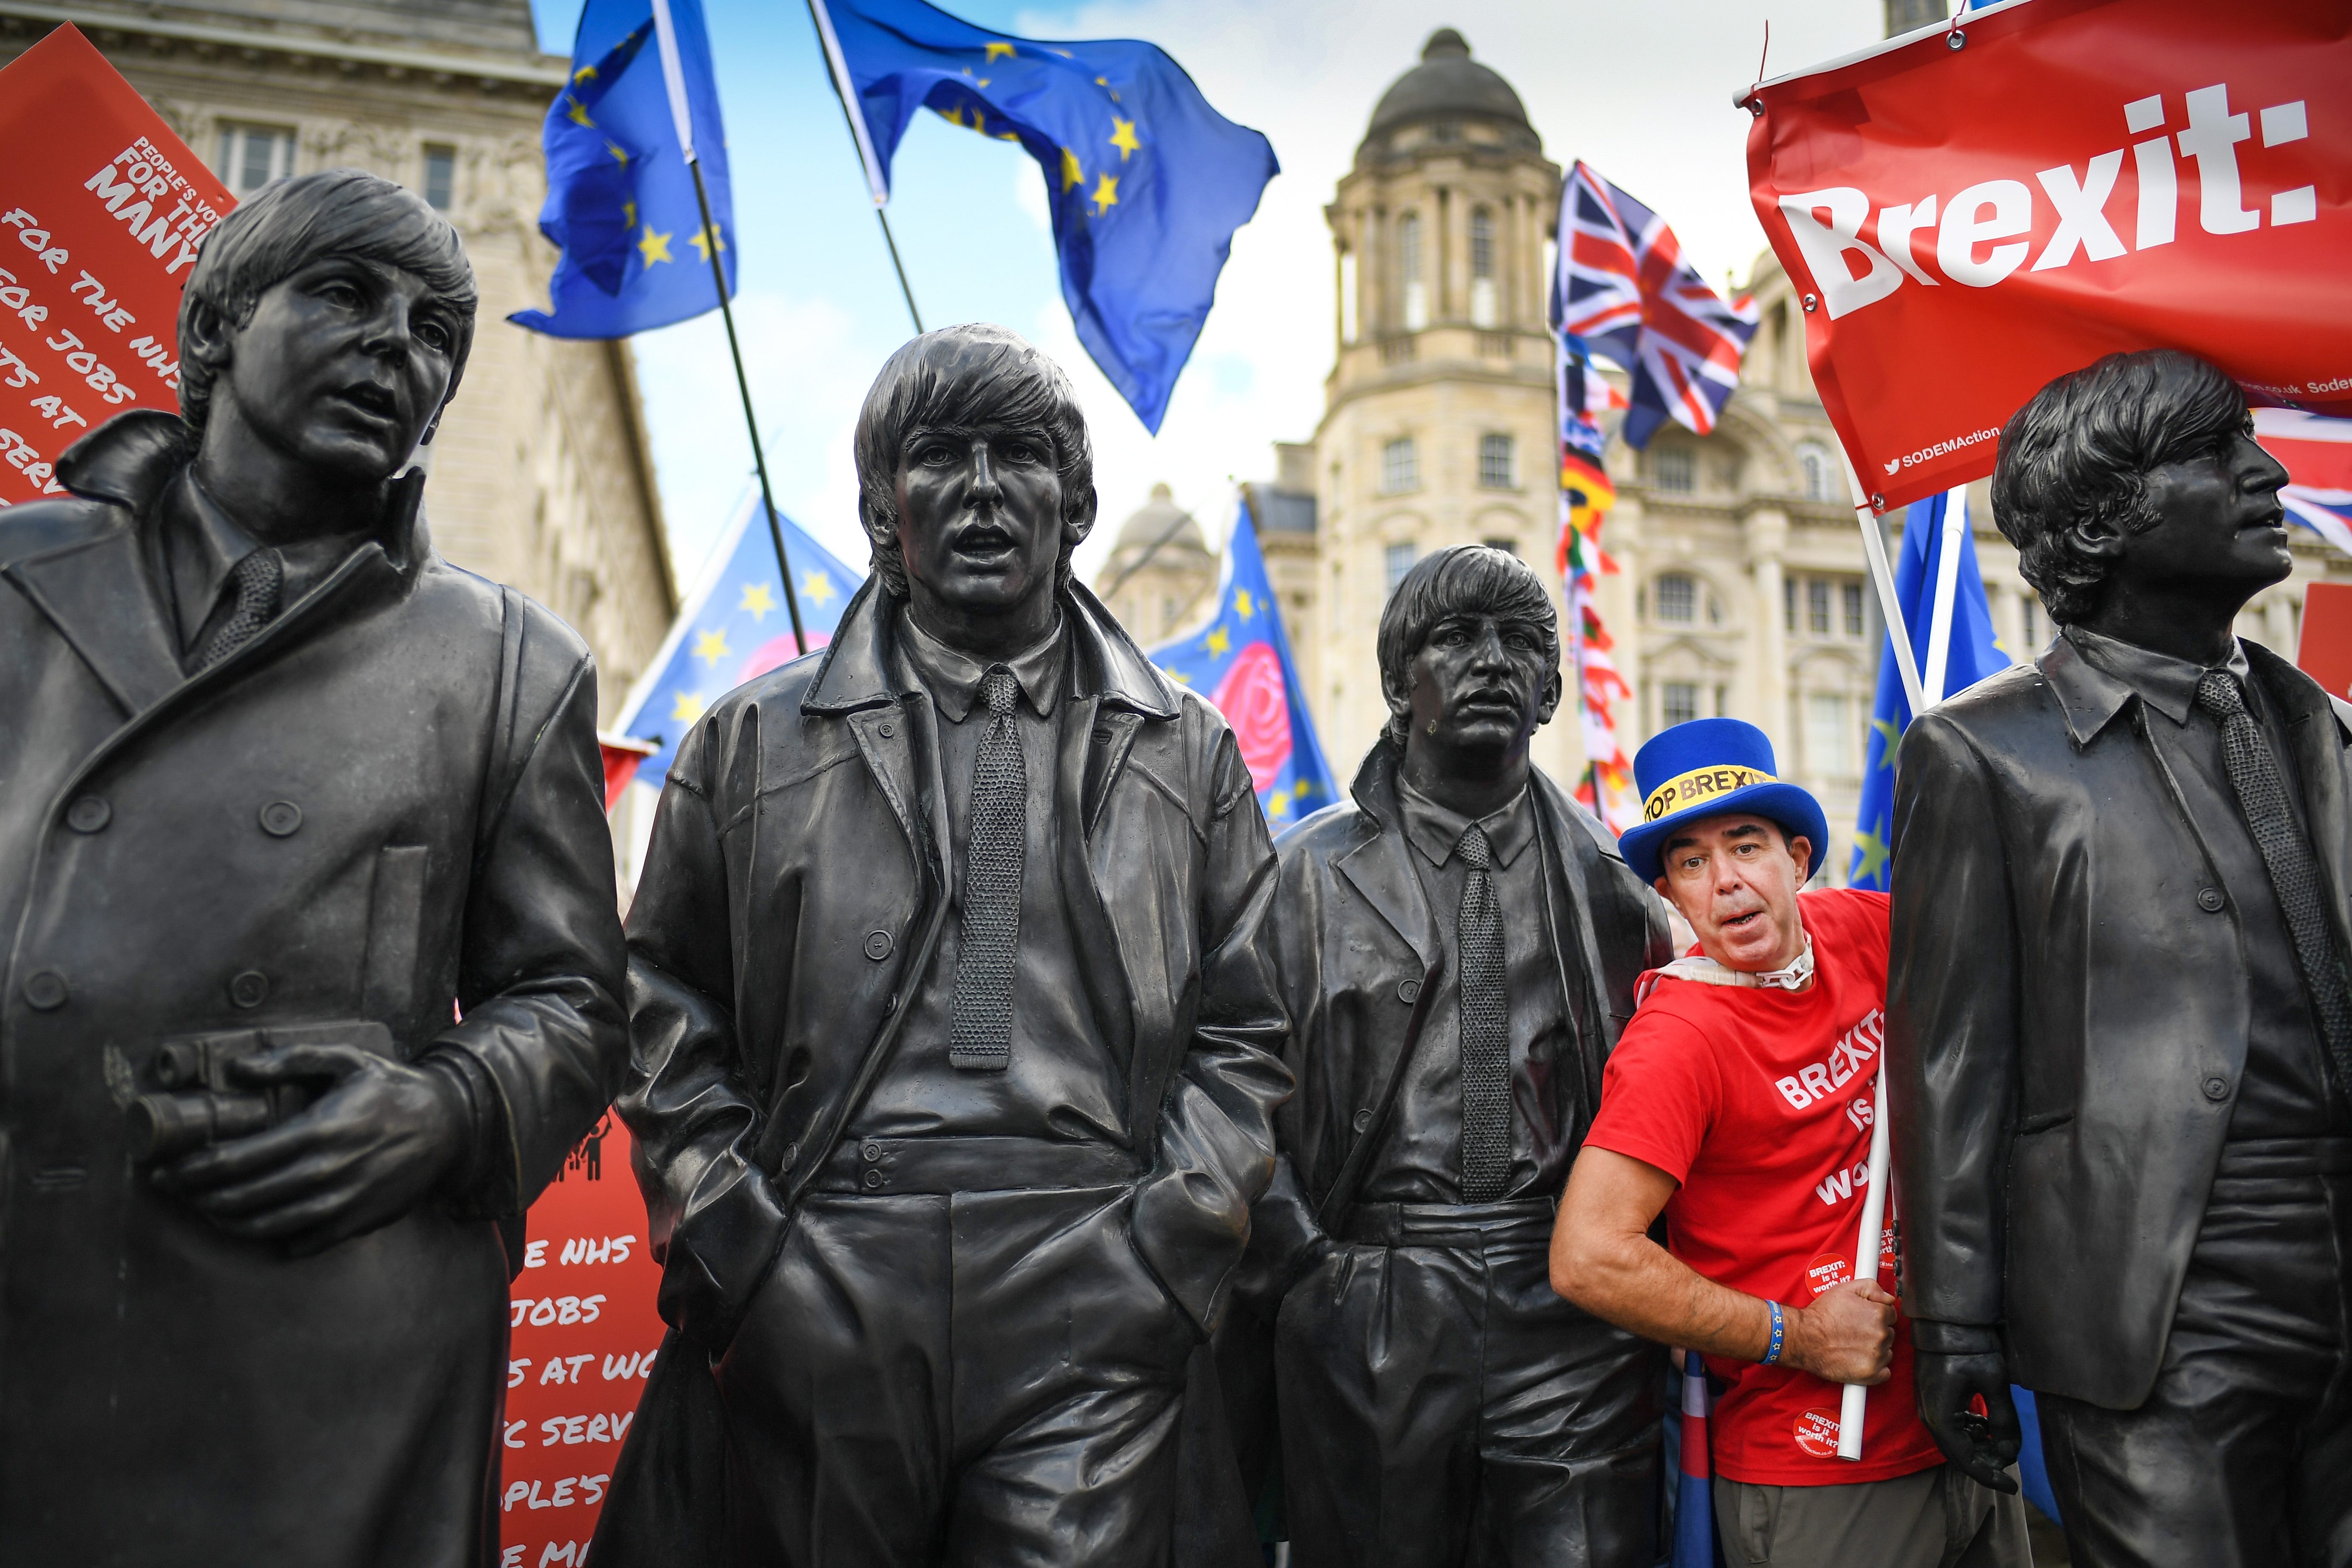 Demonstrators on the March For The Many pass the Beatles statues on Sept. 23, 2018 in Liverpool, England. The March For The Many is calling for a people's vote on the final outcome of the government's Brexit negotiations.